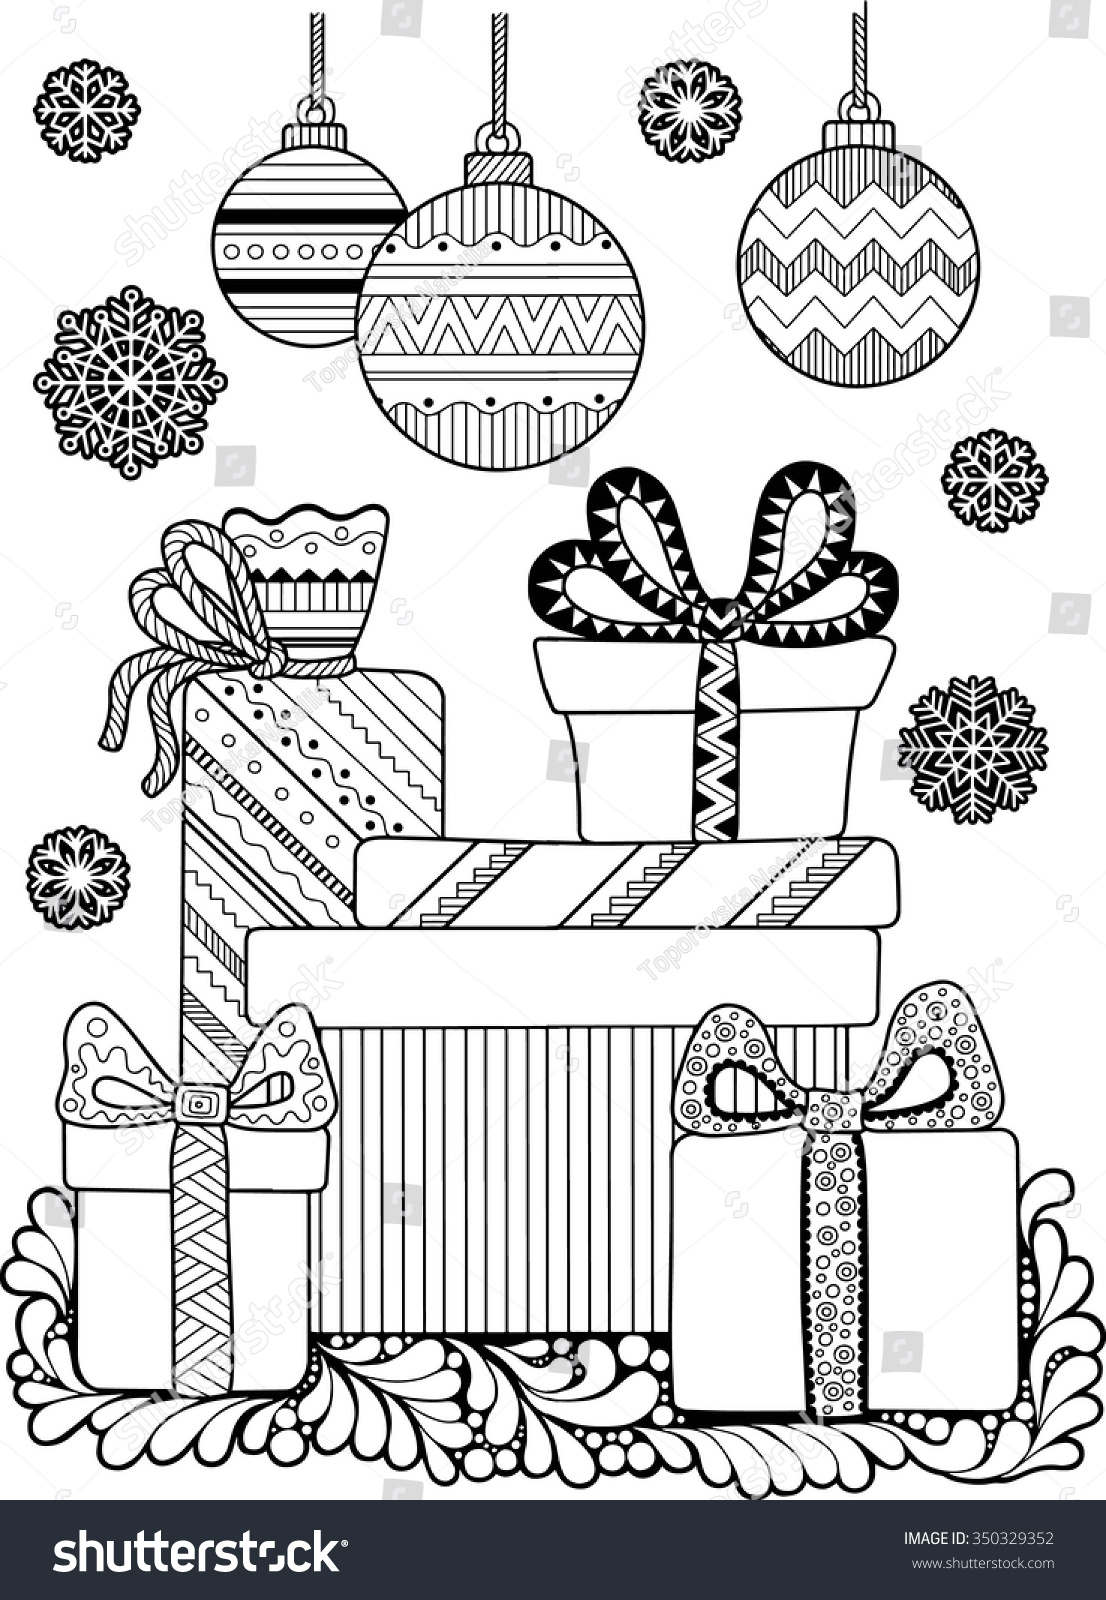 Christmas Coloring Book Stock Vector Illustration 350329352 : Shutterstock